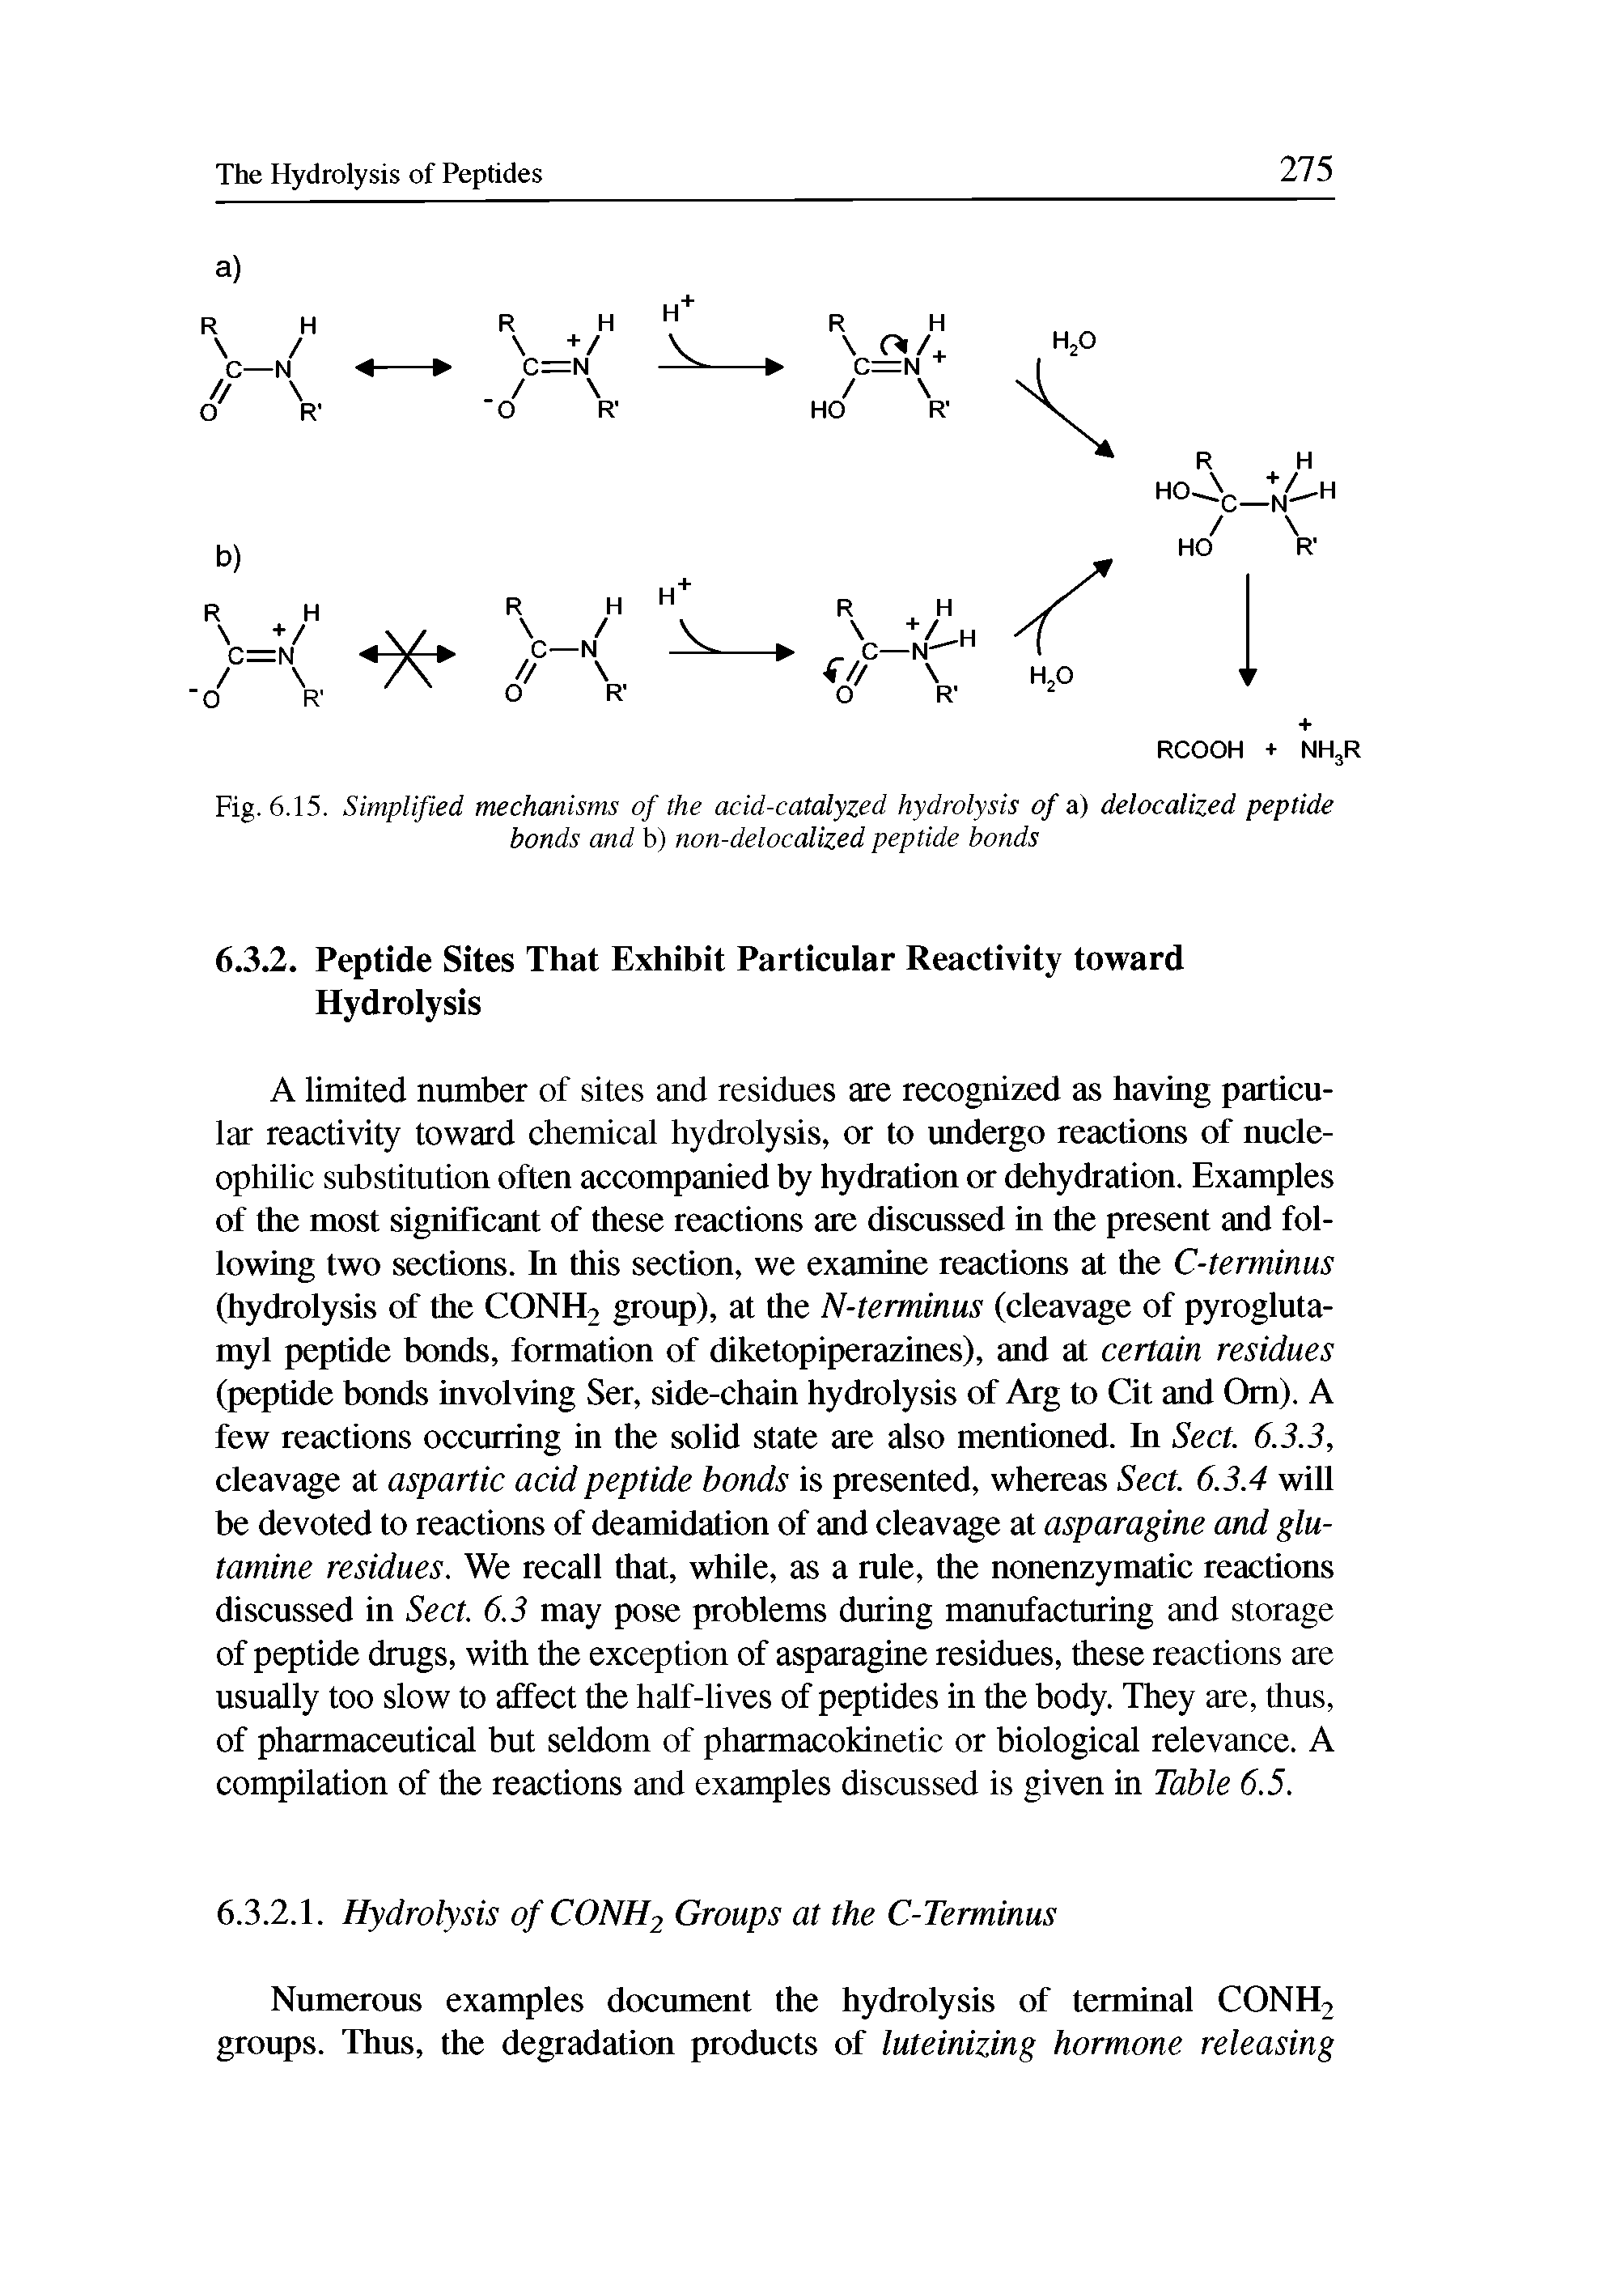 Fig. 6.15. Simplified mechanisms of the acid-catalyzed hydrolysis of a) delocalized peptide bonds and b) non-delocalized peptide bonds...